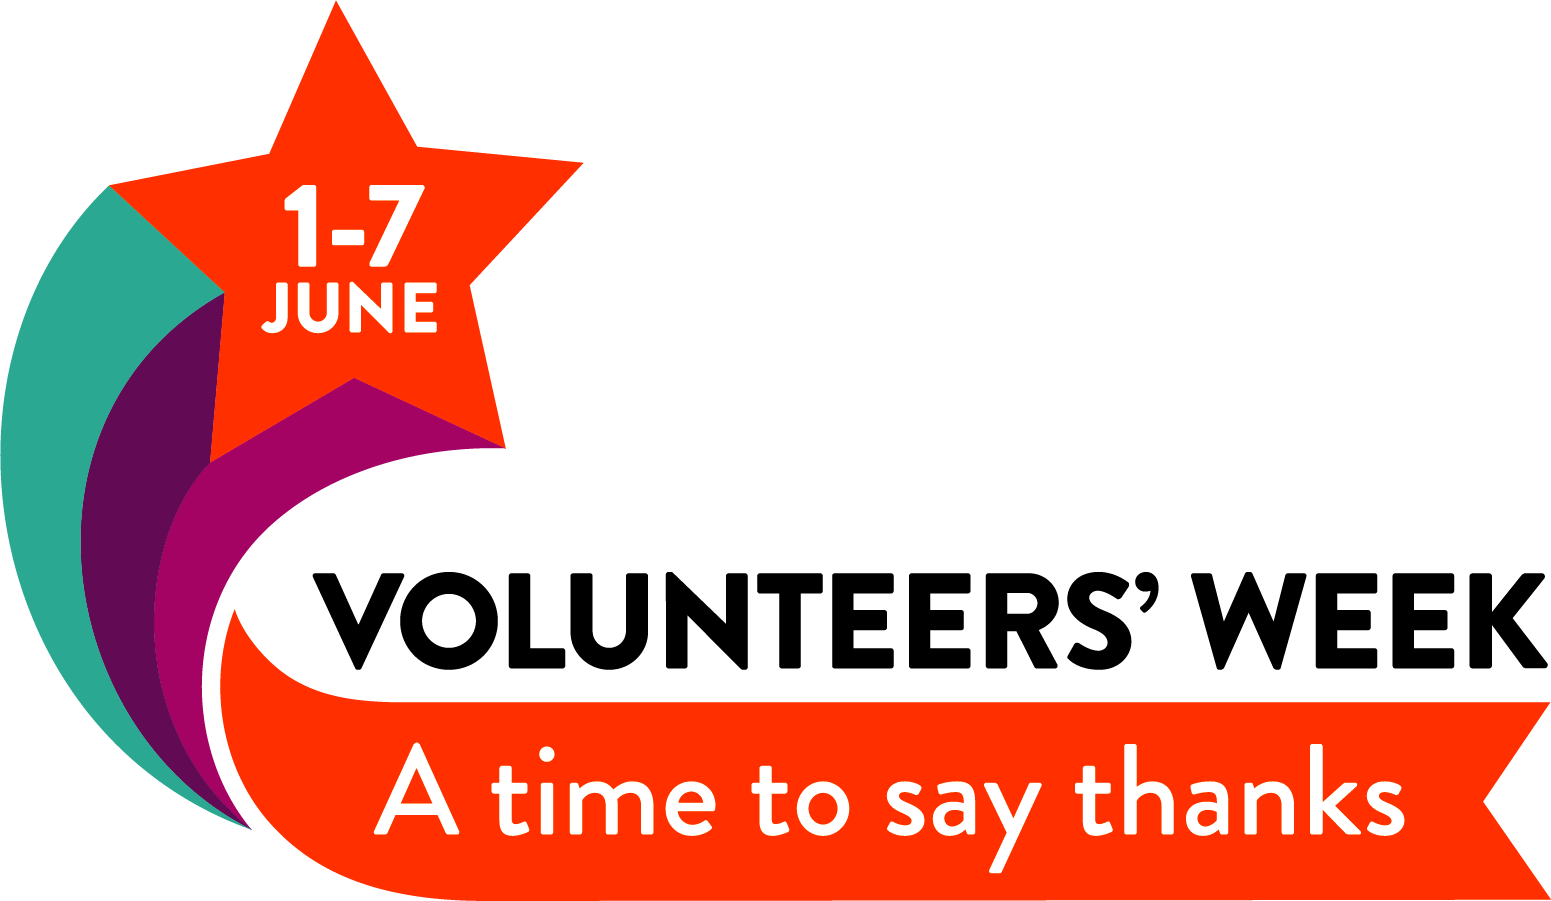 Volunteers' Week logo featuring a star with the 1-7 June written in it. Text also reads Volunteers' Week, A time to say thanks.